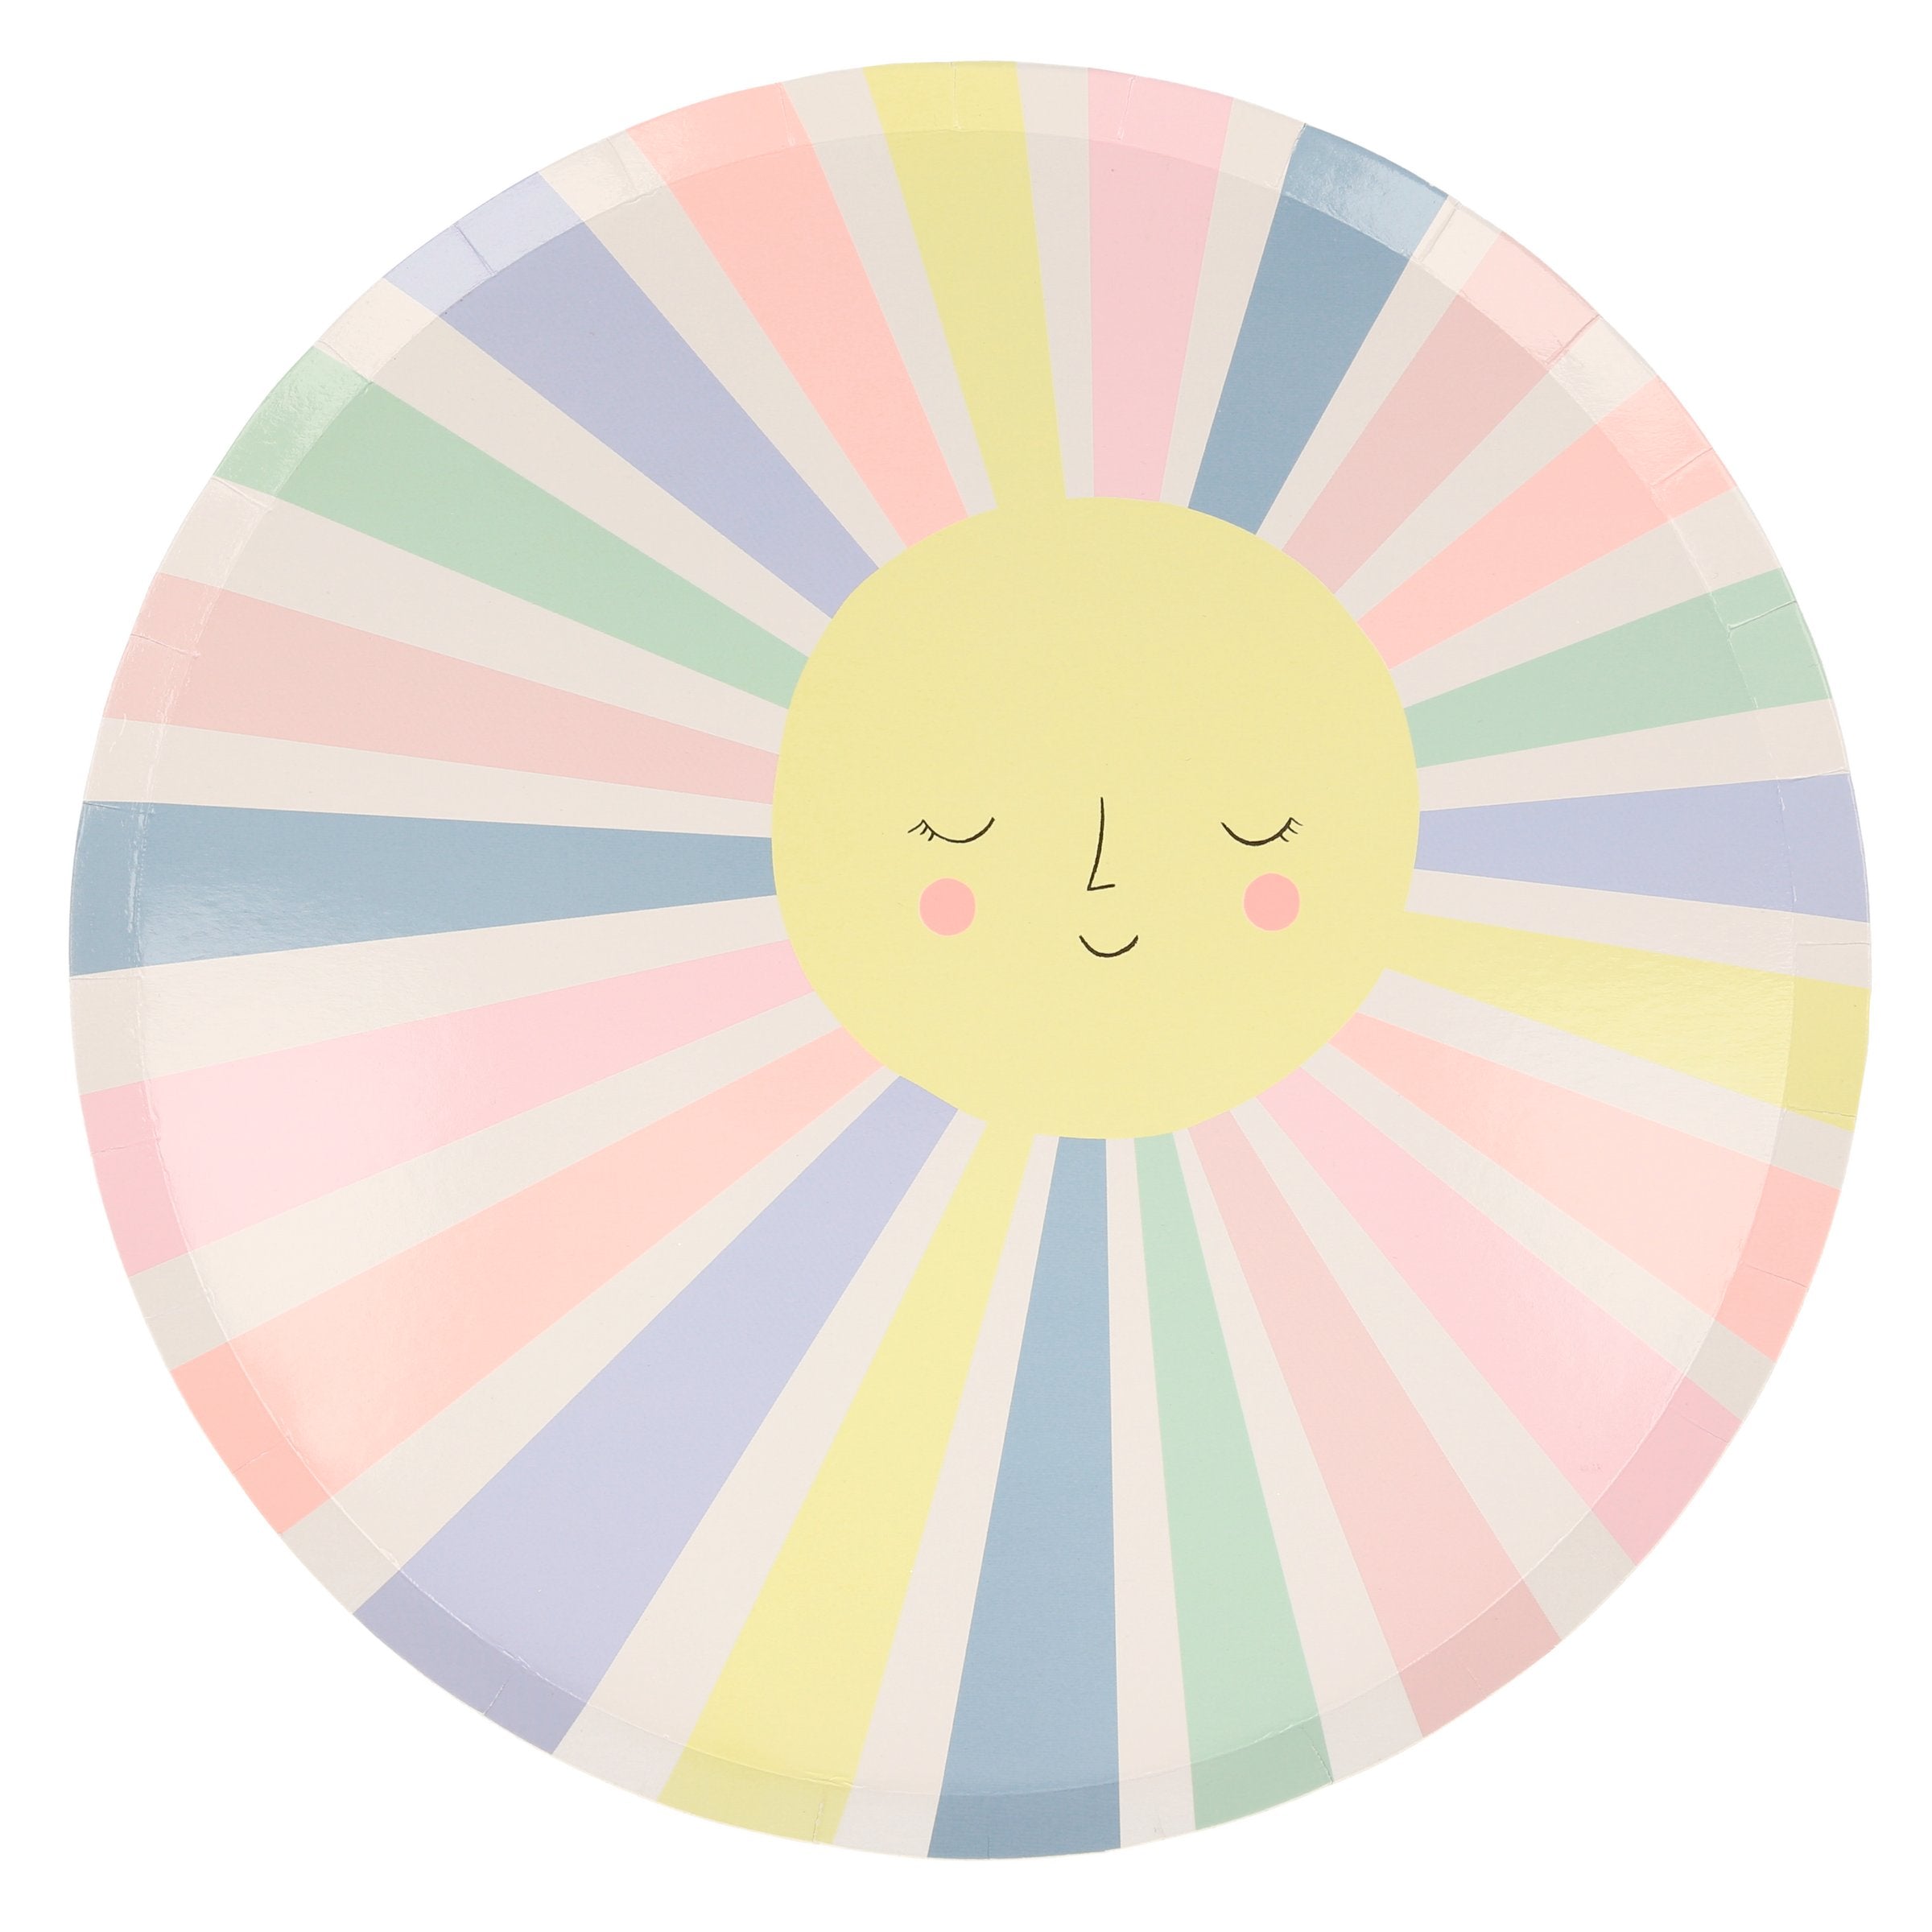 Fill your party with joy and cheer with these colourful smiling sun party plates.